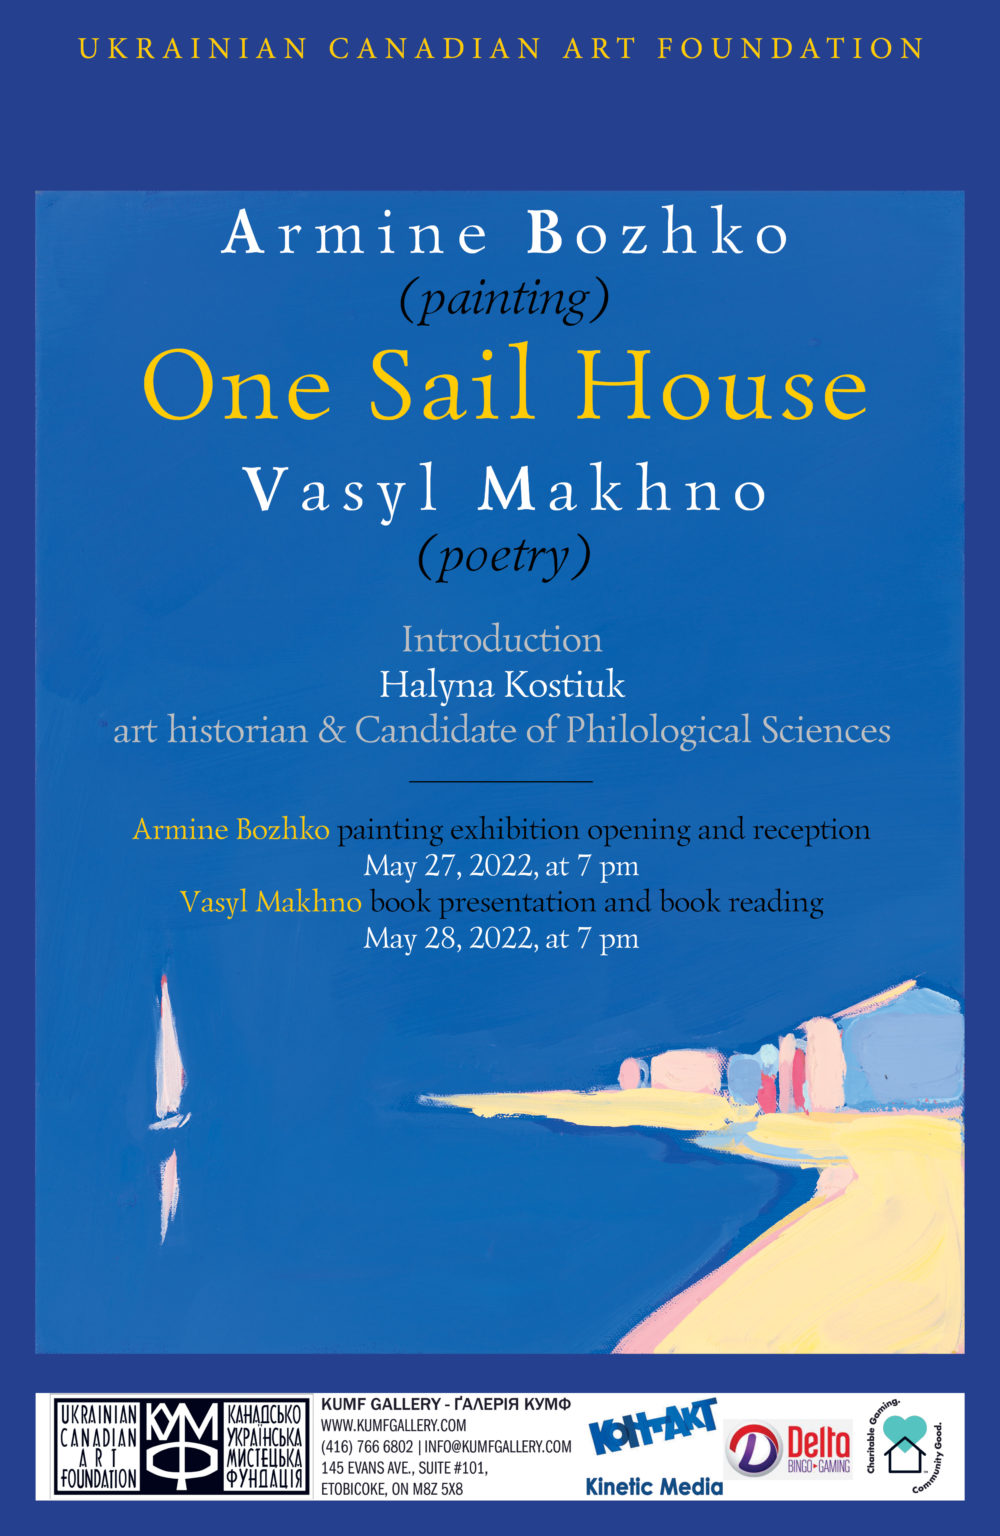 One Sail House. May 28-June 26, 2022